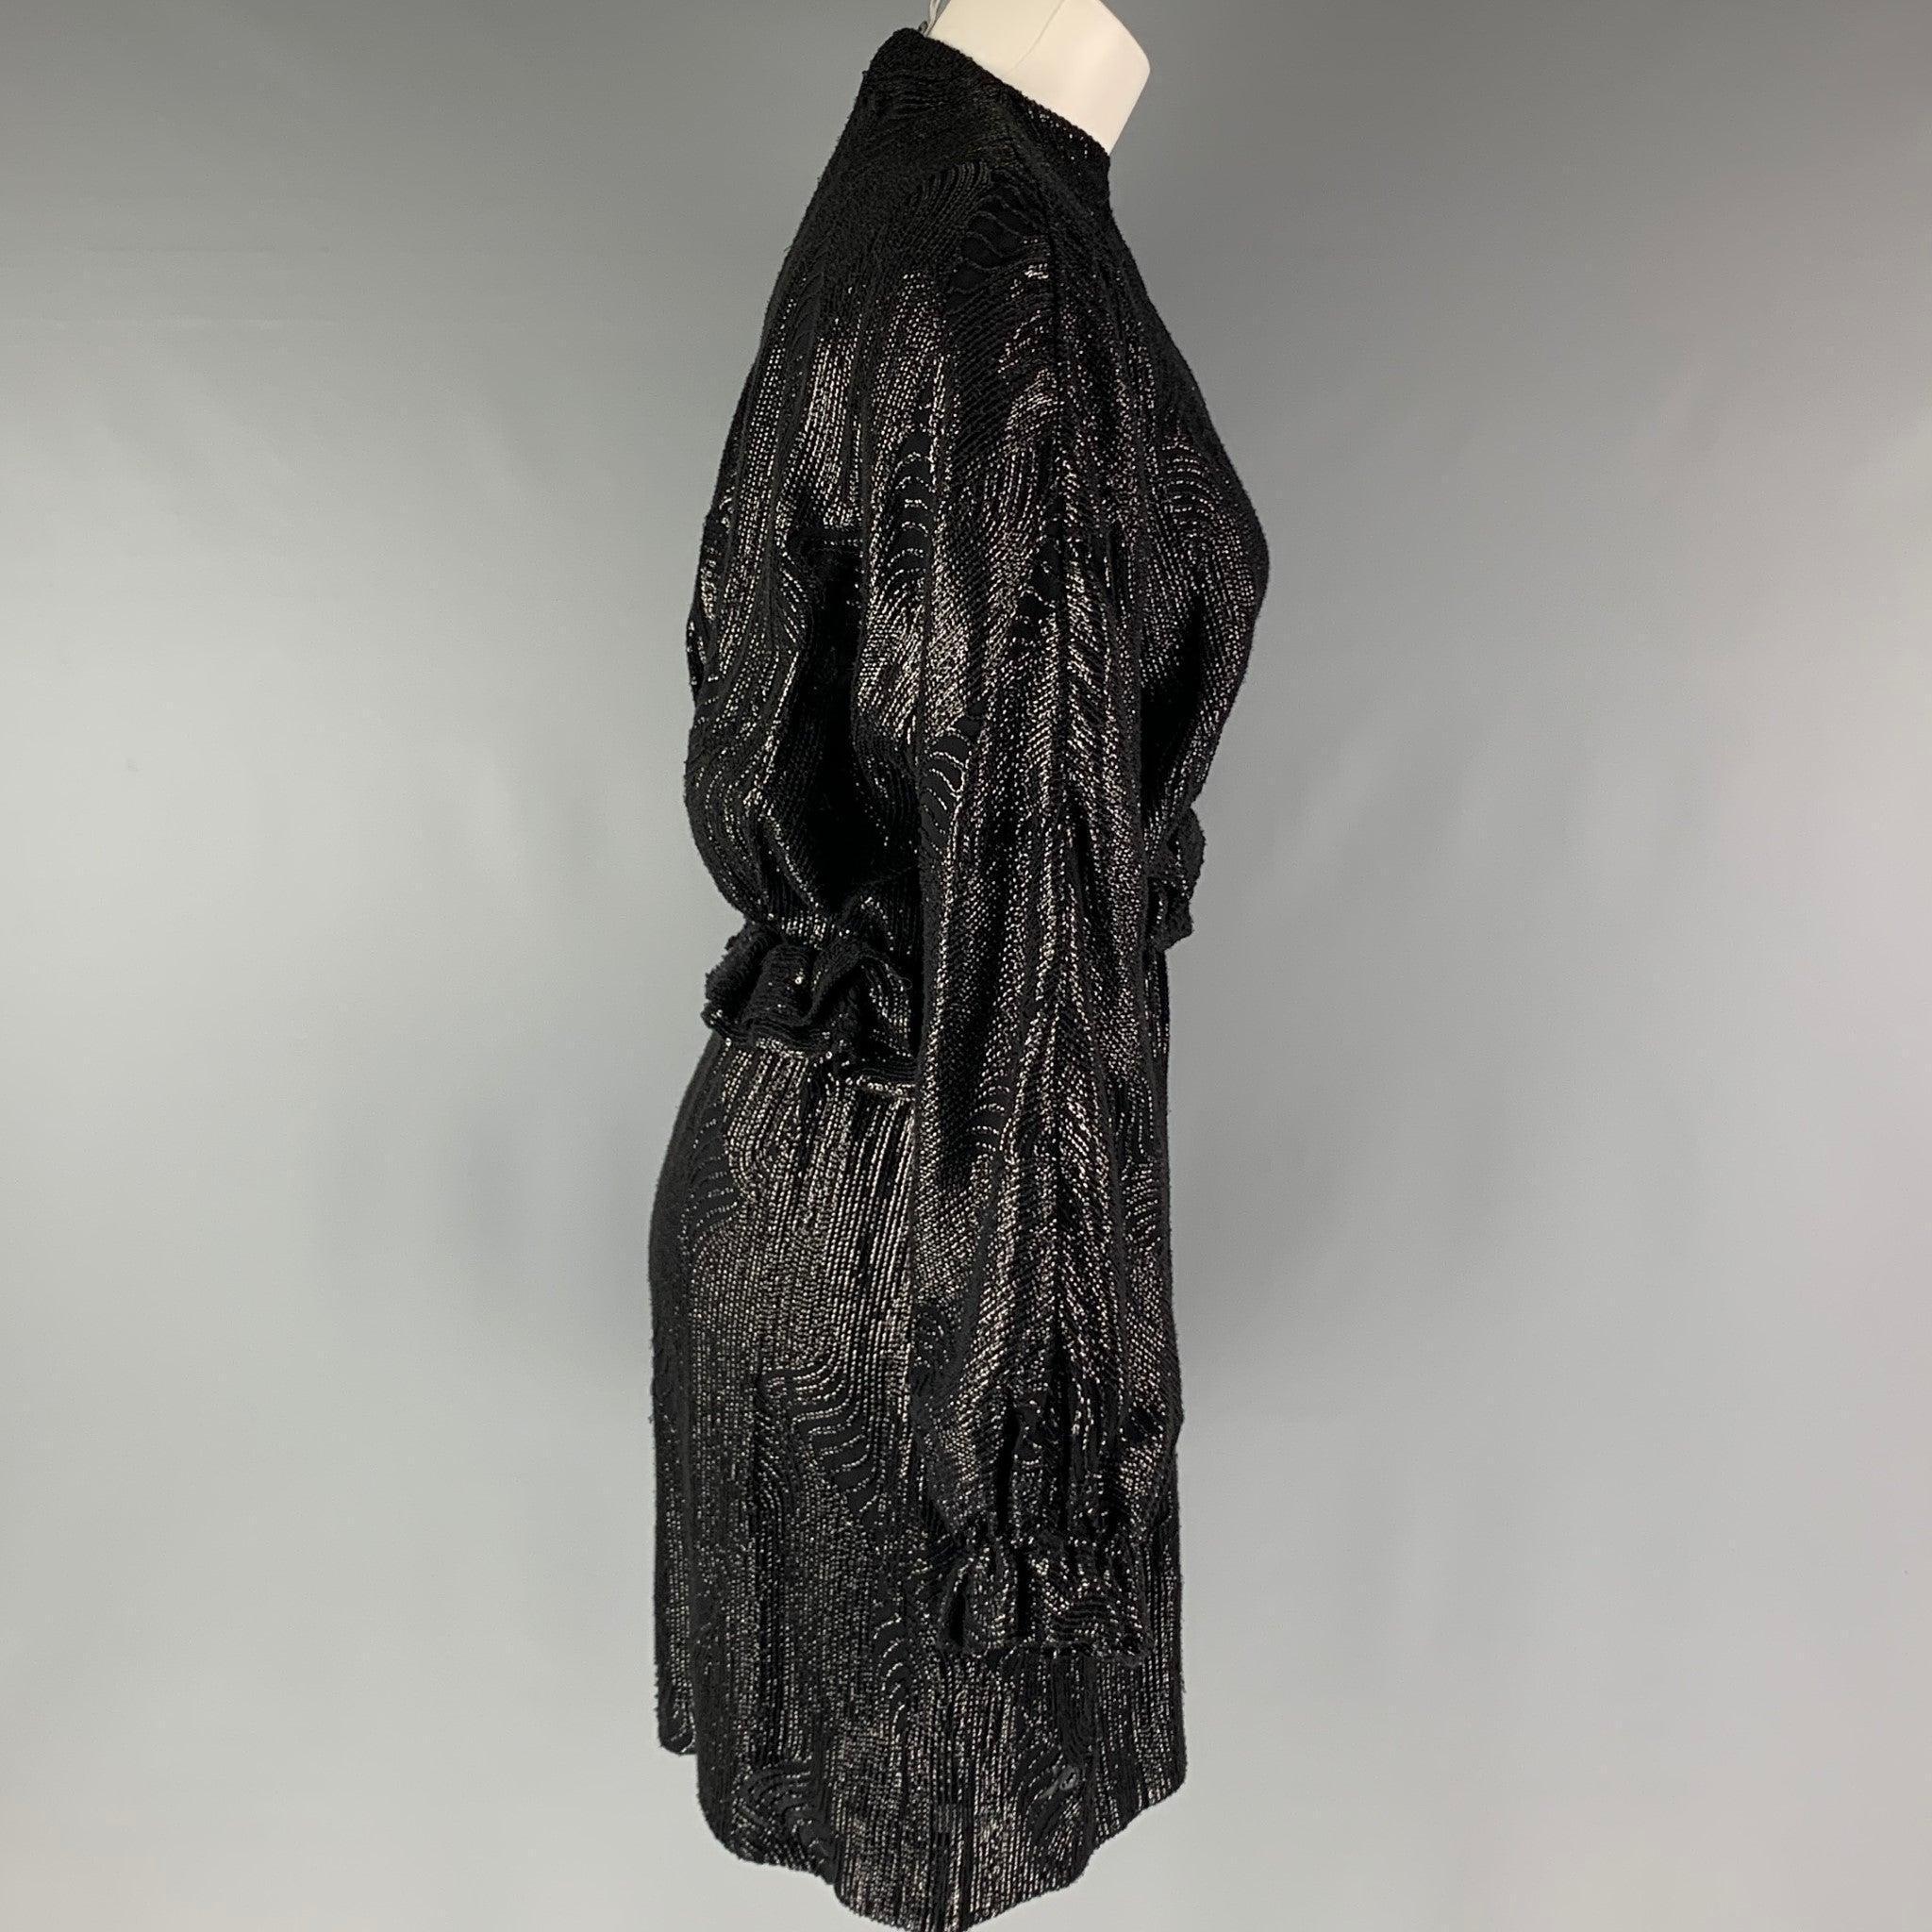 DRIES VAN NOTEN long sleeve dress comes in a black viscose woven material featuring a black sequins throughout, drop shoulder, ruffled detail at the waistband, elastic waistband and zip up closure. Very Good Pre-Owned Condition. Minor signs of wear.